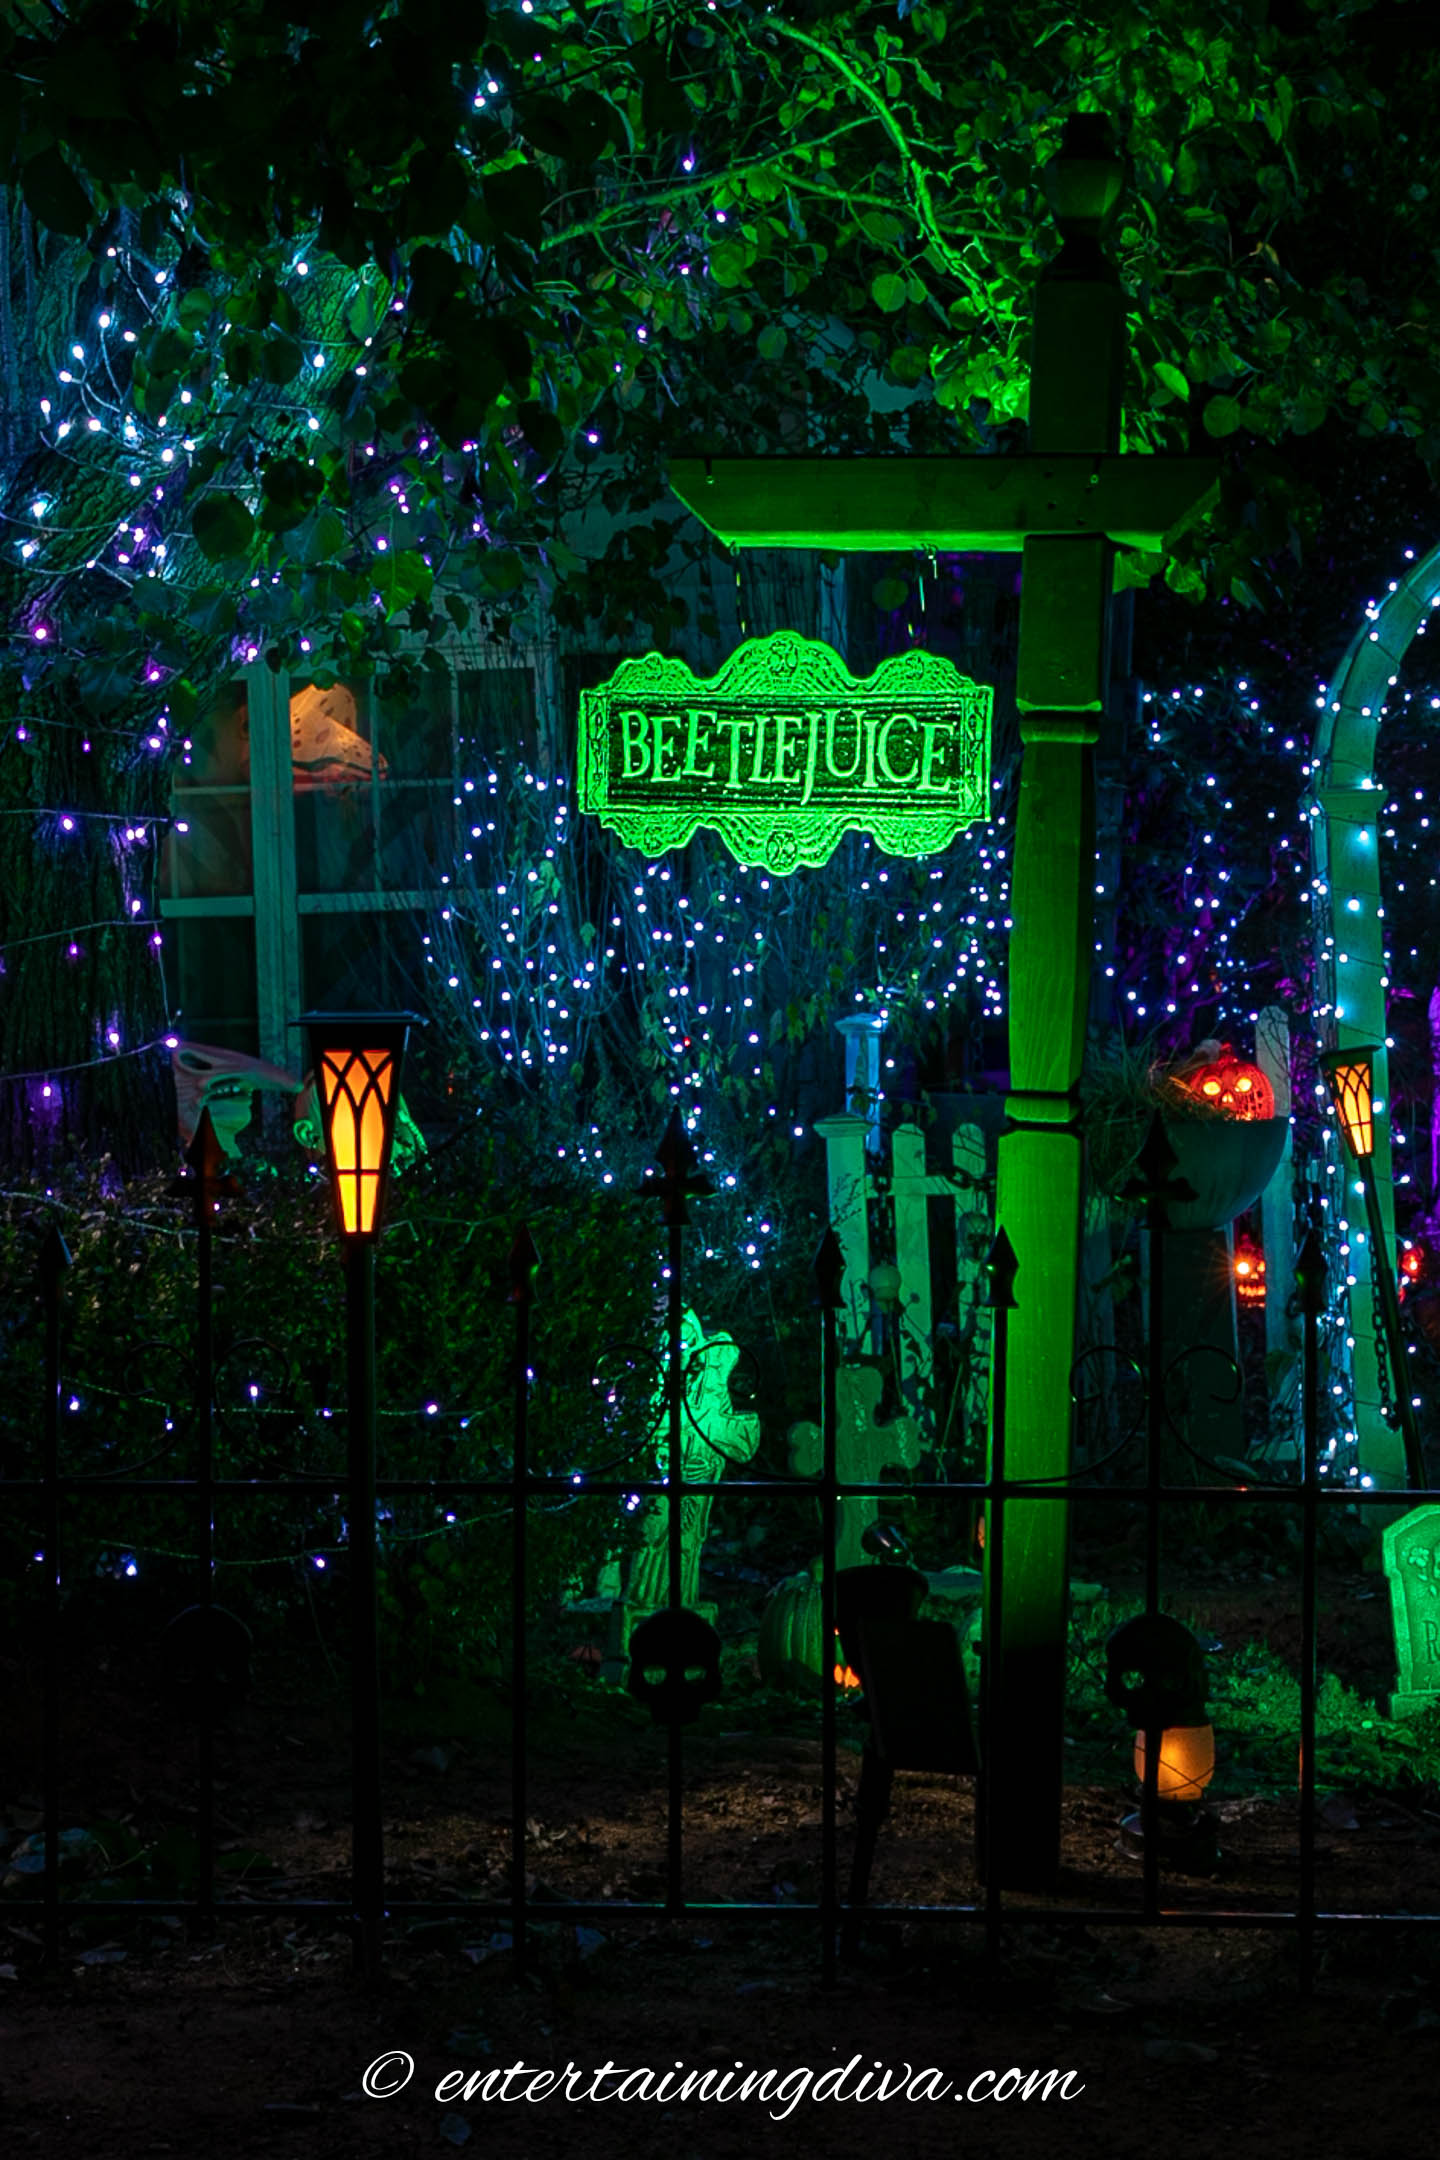 A yard decorated for Halloween with green lights and a Beetlejuice sign.